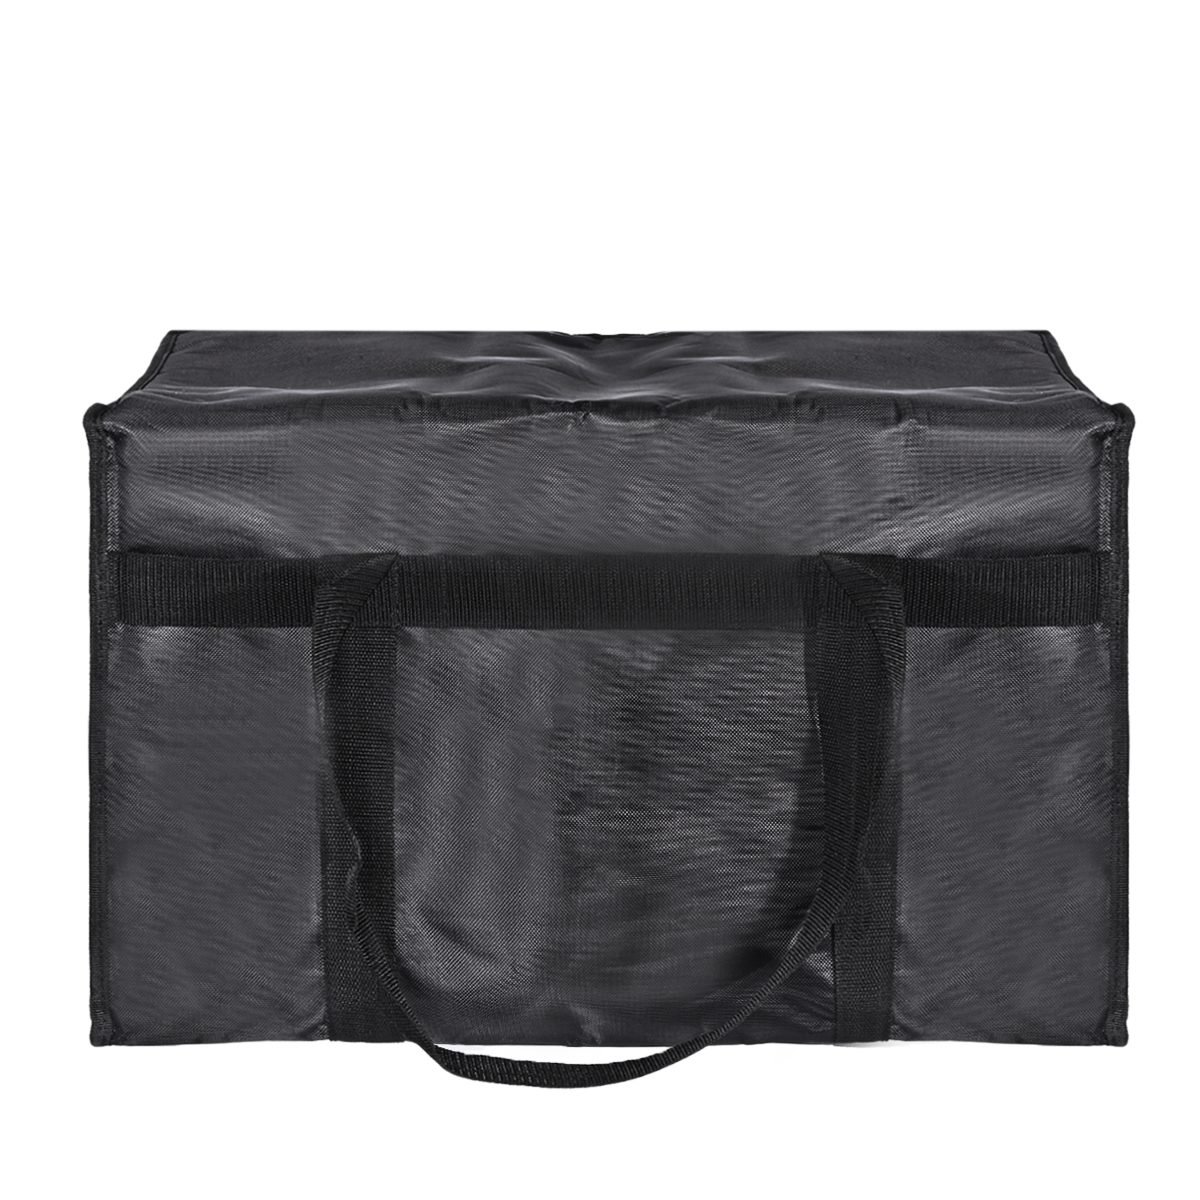 292348583514746L-Food-Delivery-Bag-Thermal-Insulated-Takeaway-Bag-Camping-Picnic-Bag-1742533-4